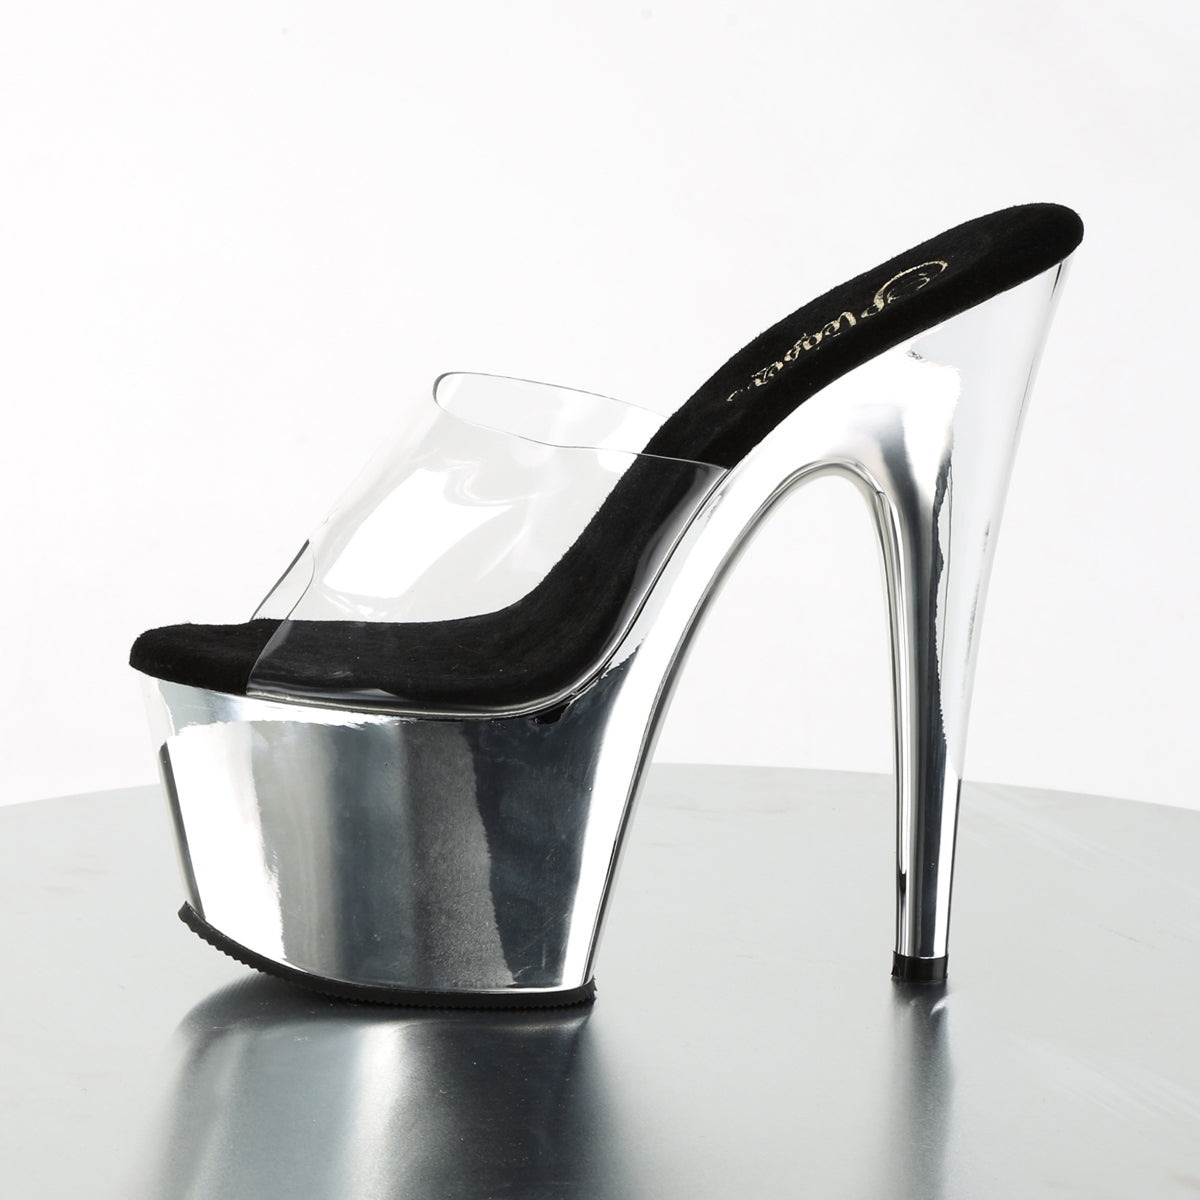 ADORE-701 / C / SCH 7 "PLEASER FAST DELIVERY 24-48h 